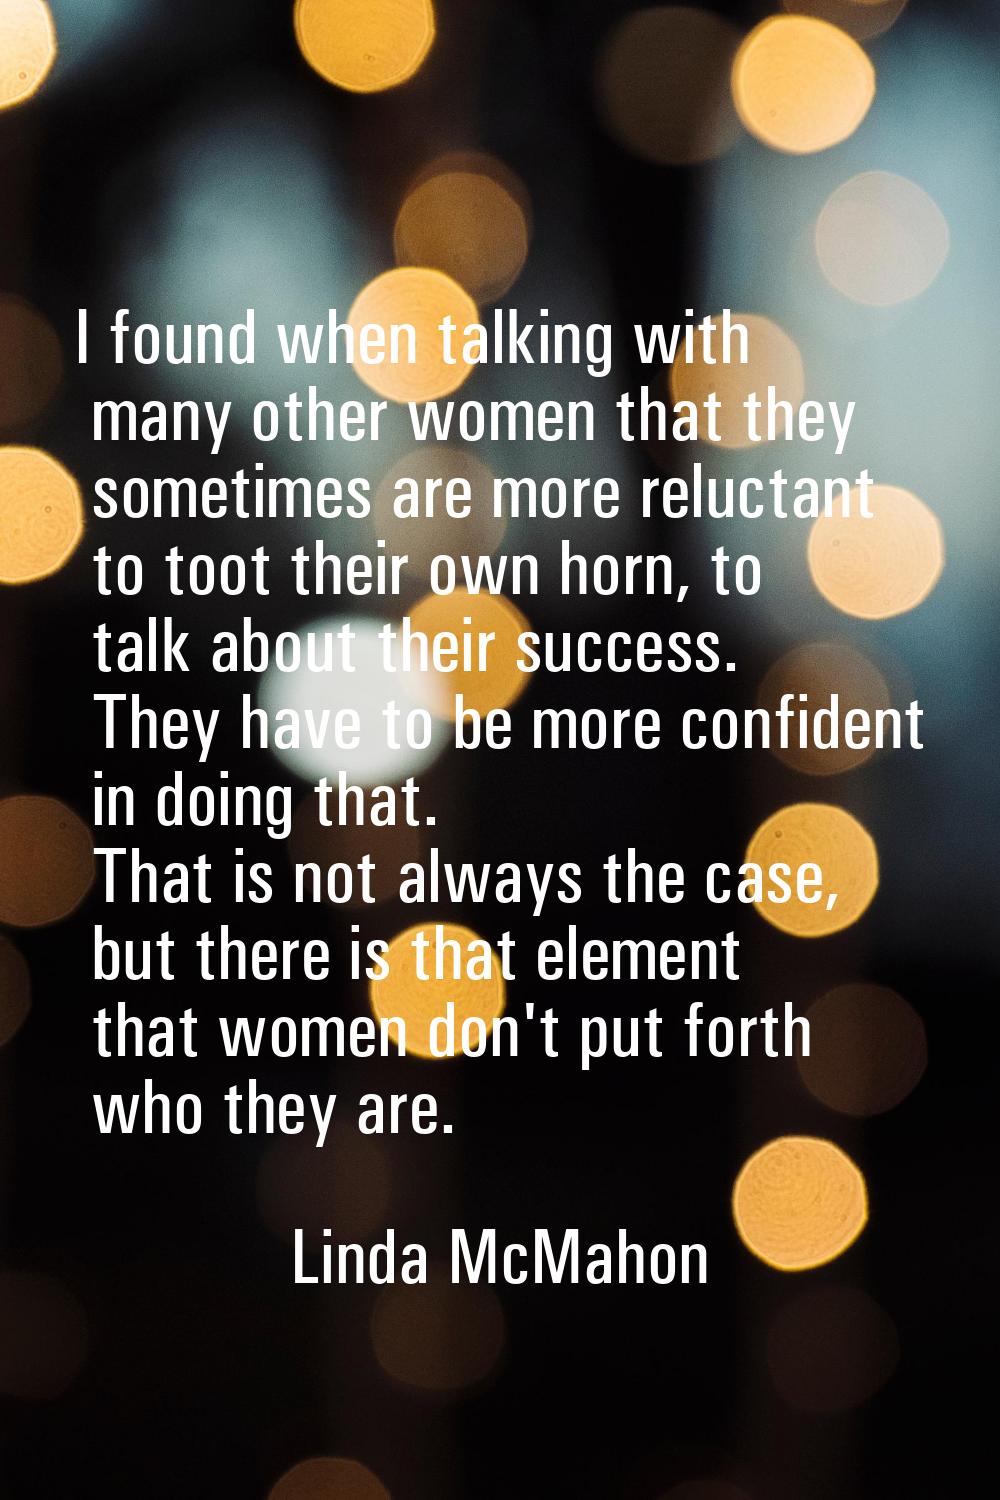 I found when talking with many other women that they sometimes are more reluctant to toot their own